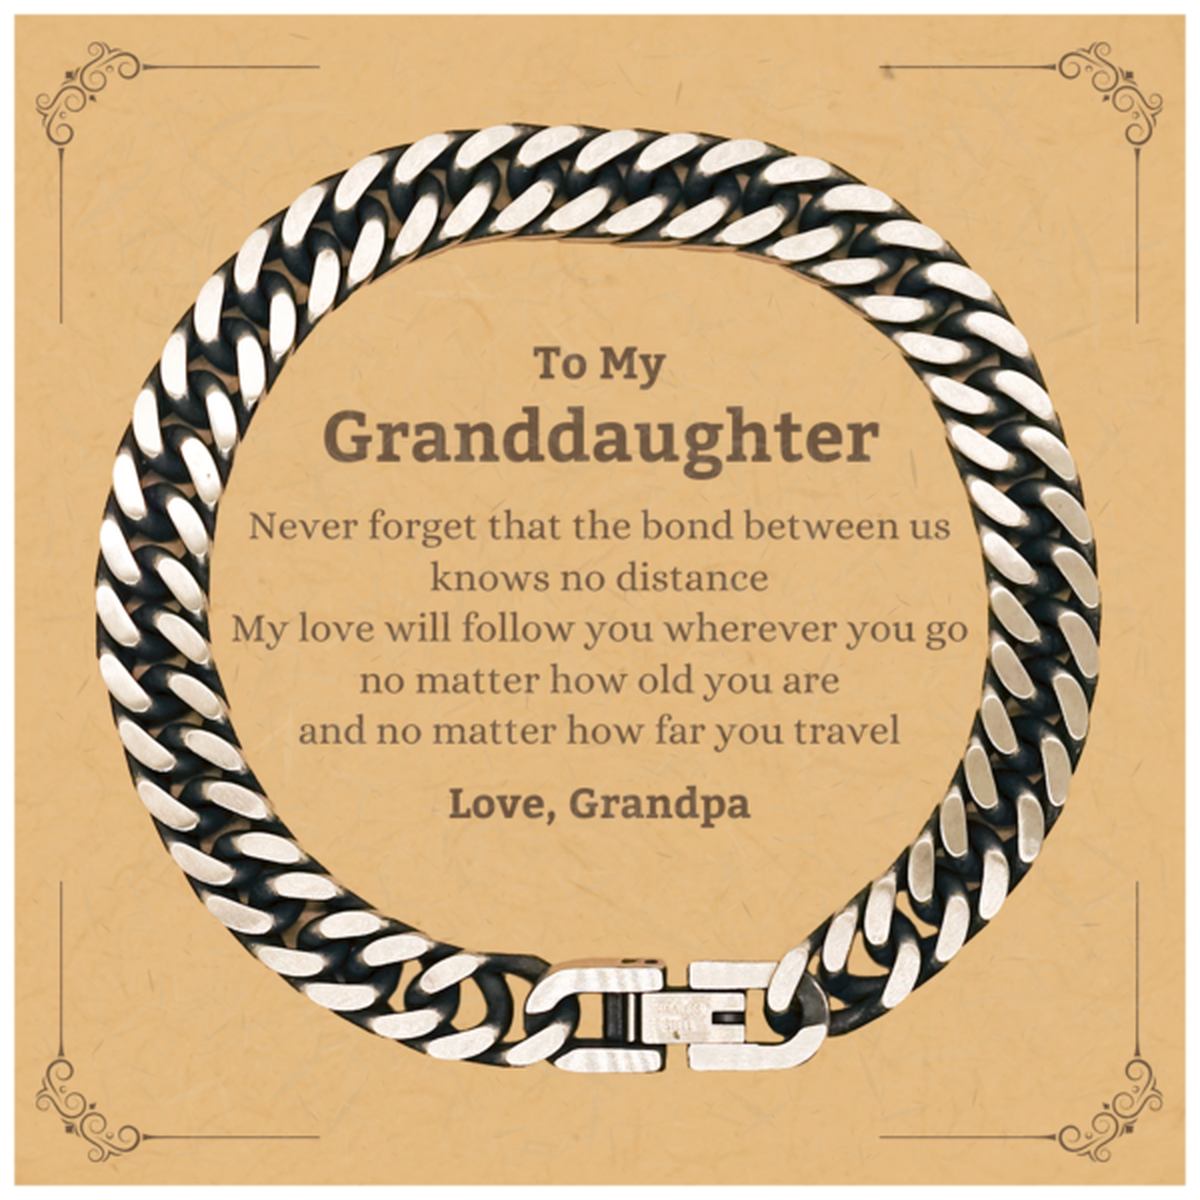 Granddaughter Birthday Gifts from Grandpa, Adjustable Cuban Link Chain Bracelet for Granddaughter Christmas Graduation Unique Gifts Granddaughter Never forget that the bond between us knows no distance. Love, Grandpa